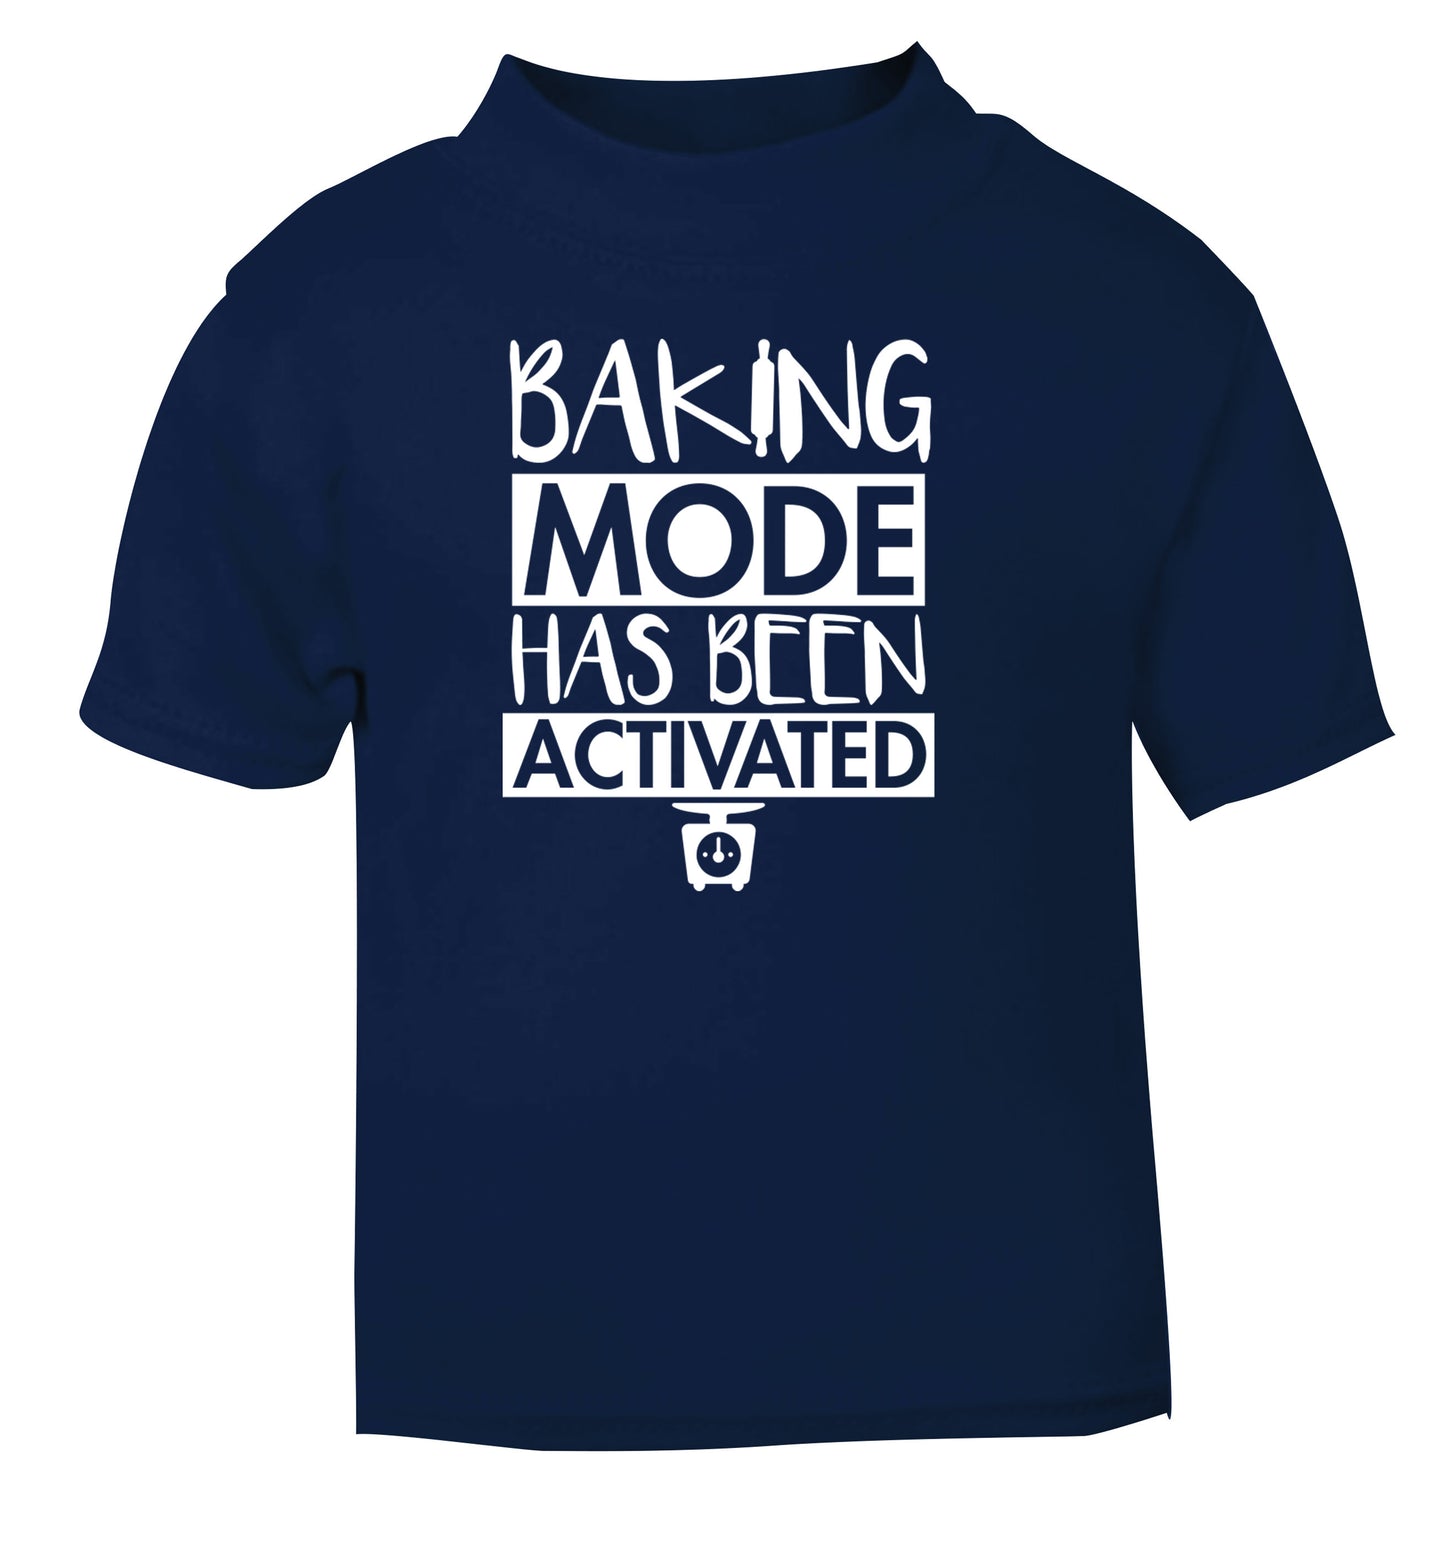 Baking mode has been activated navy Baby Toddler Tshirt 2 Years